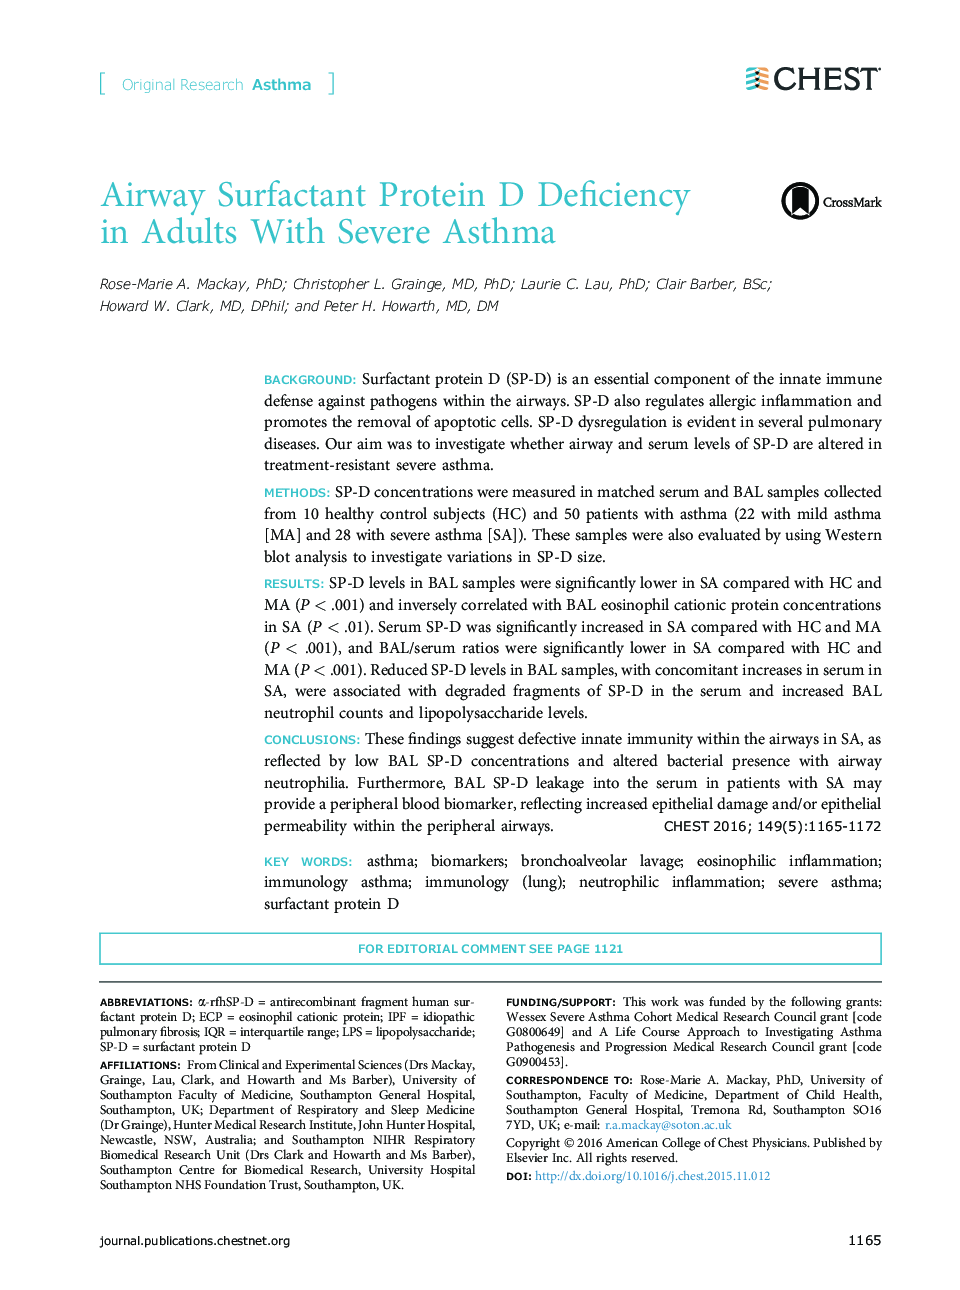 Airway Surfactant Protein D Deficiency in Adults With Severe Asthma 